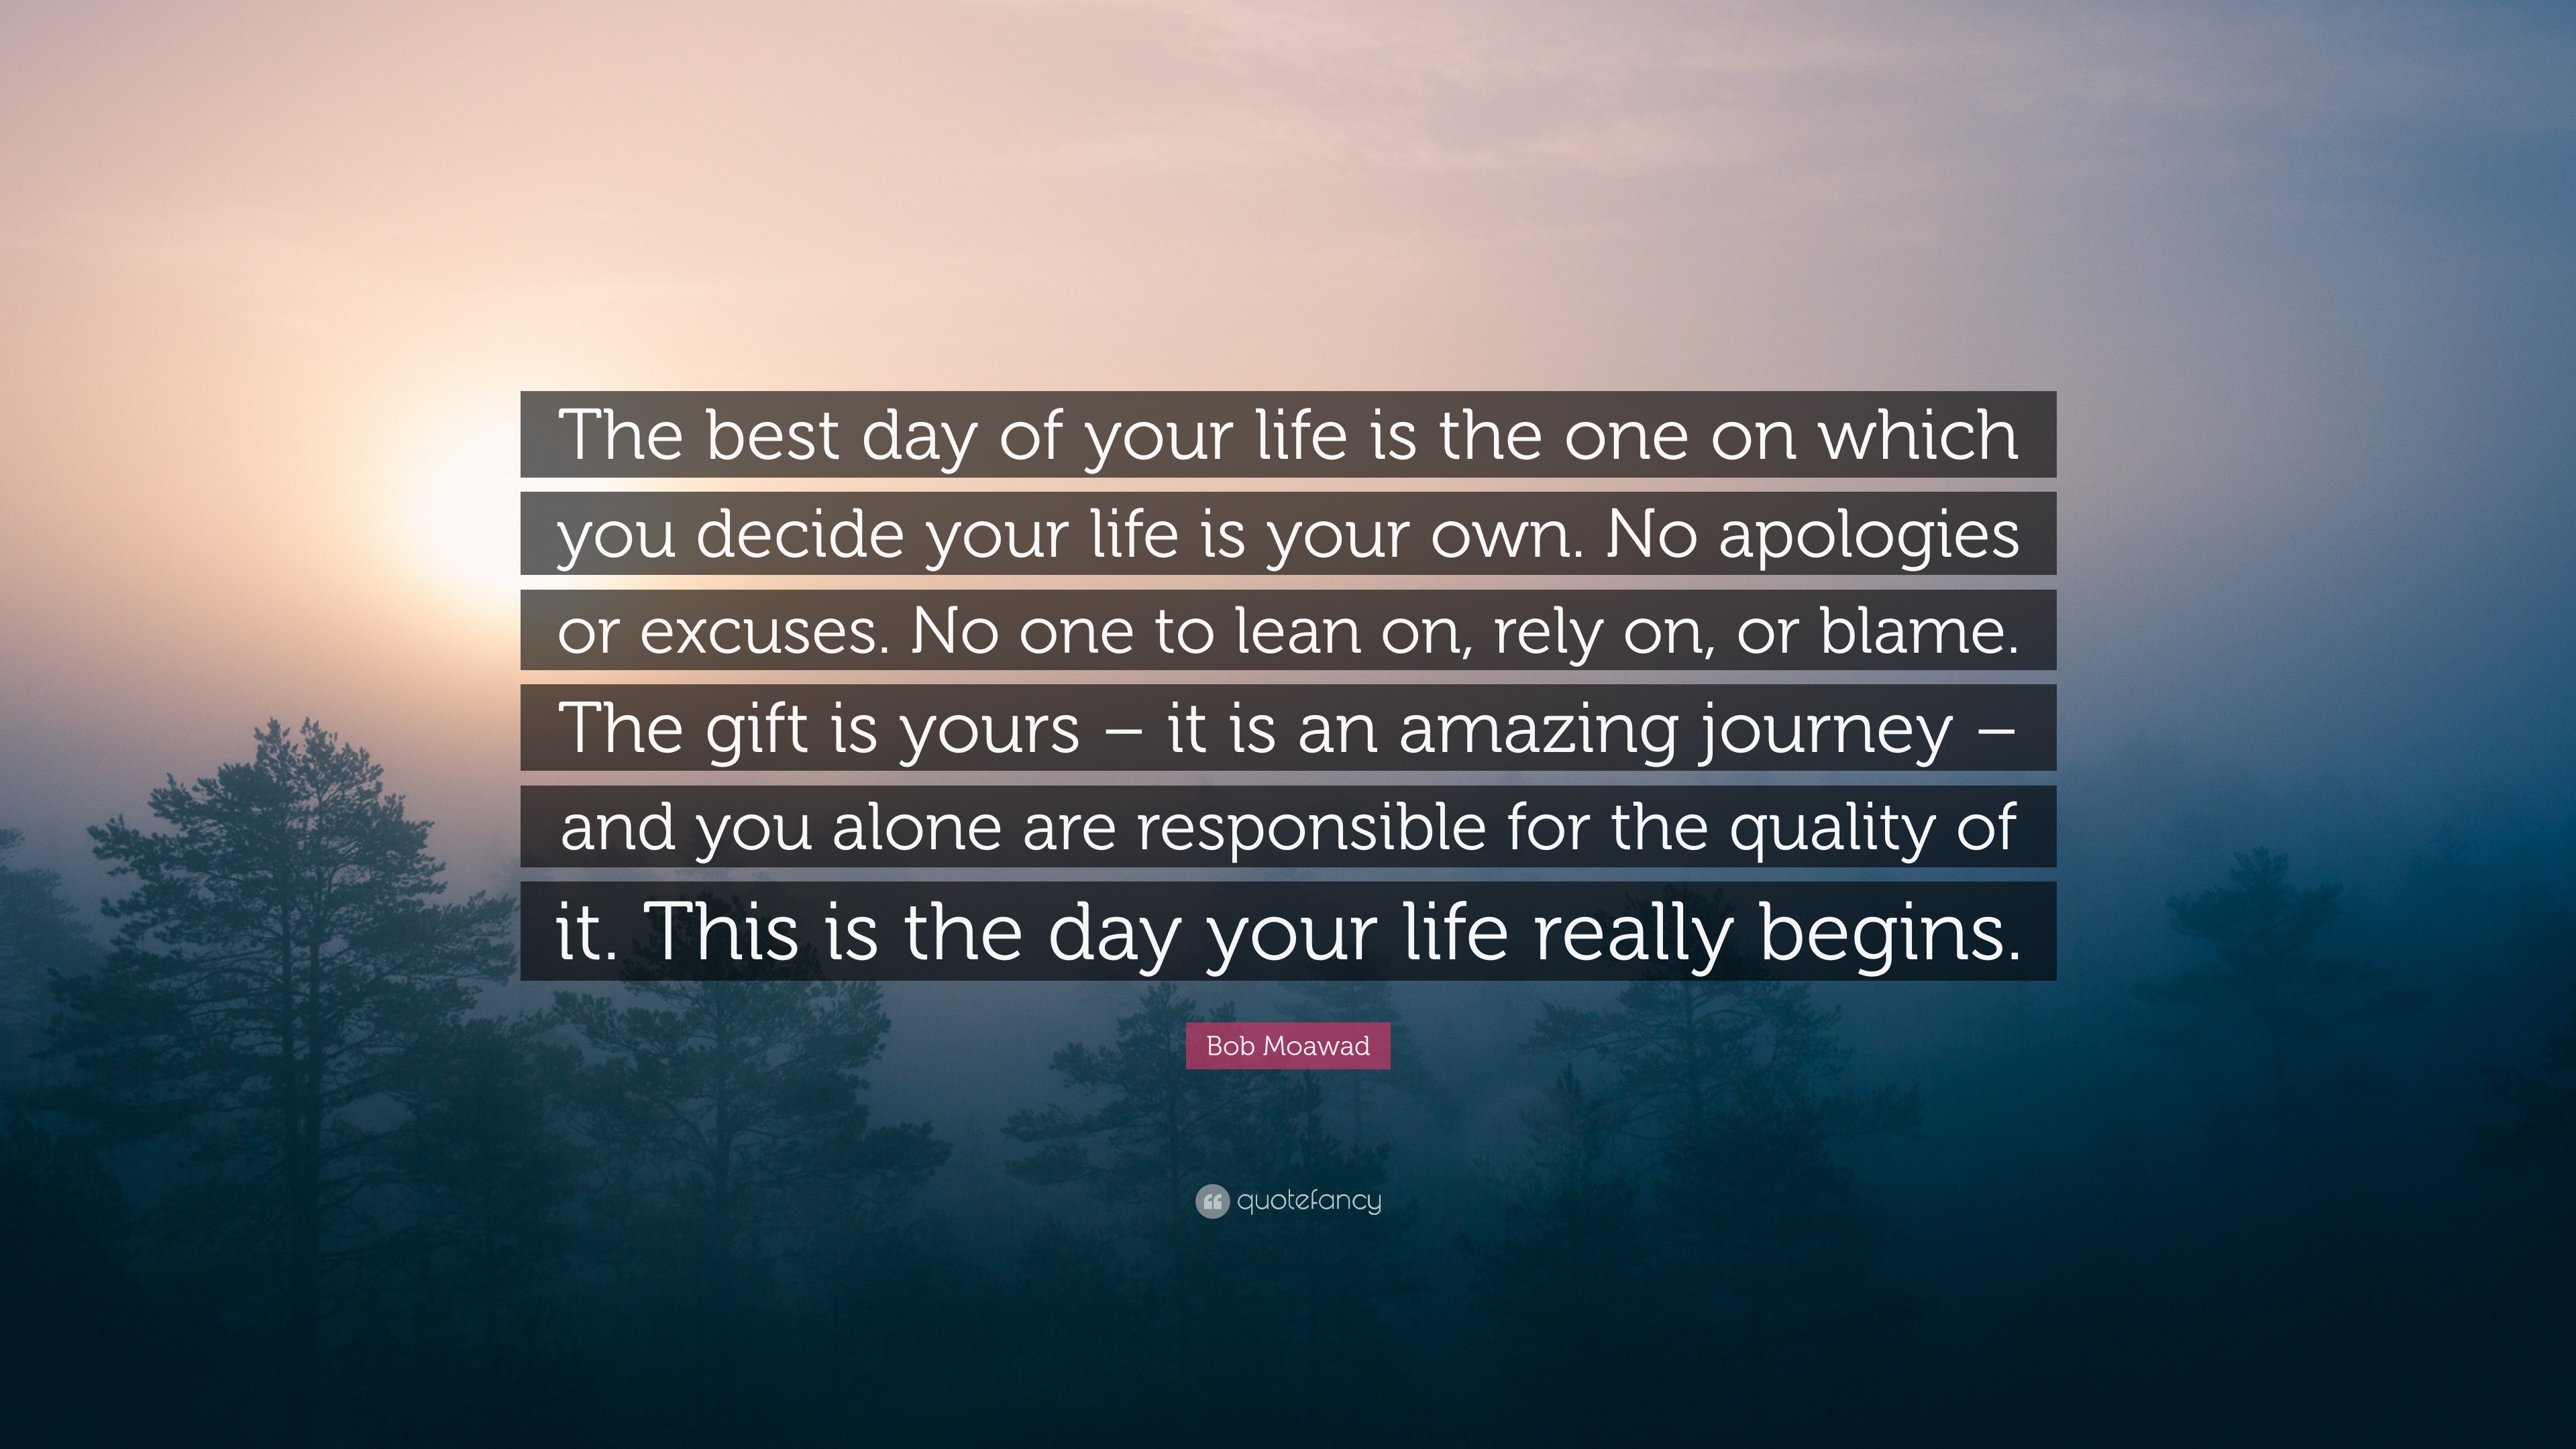 Bob Moawad Quote: “The best day of your life is the one on which you ...